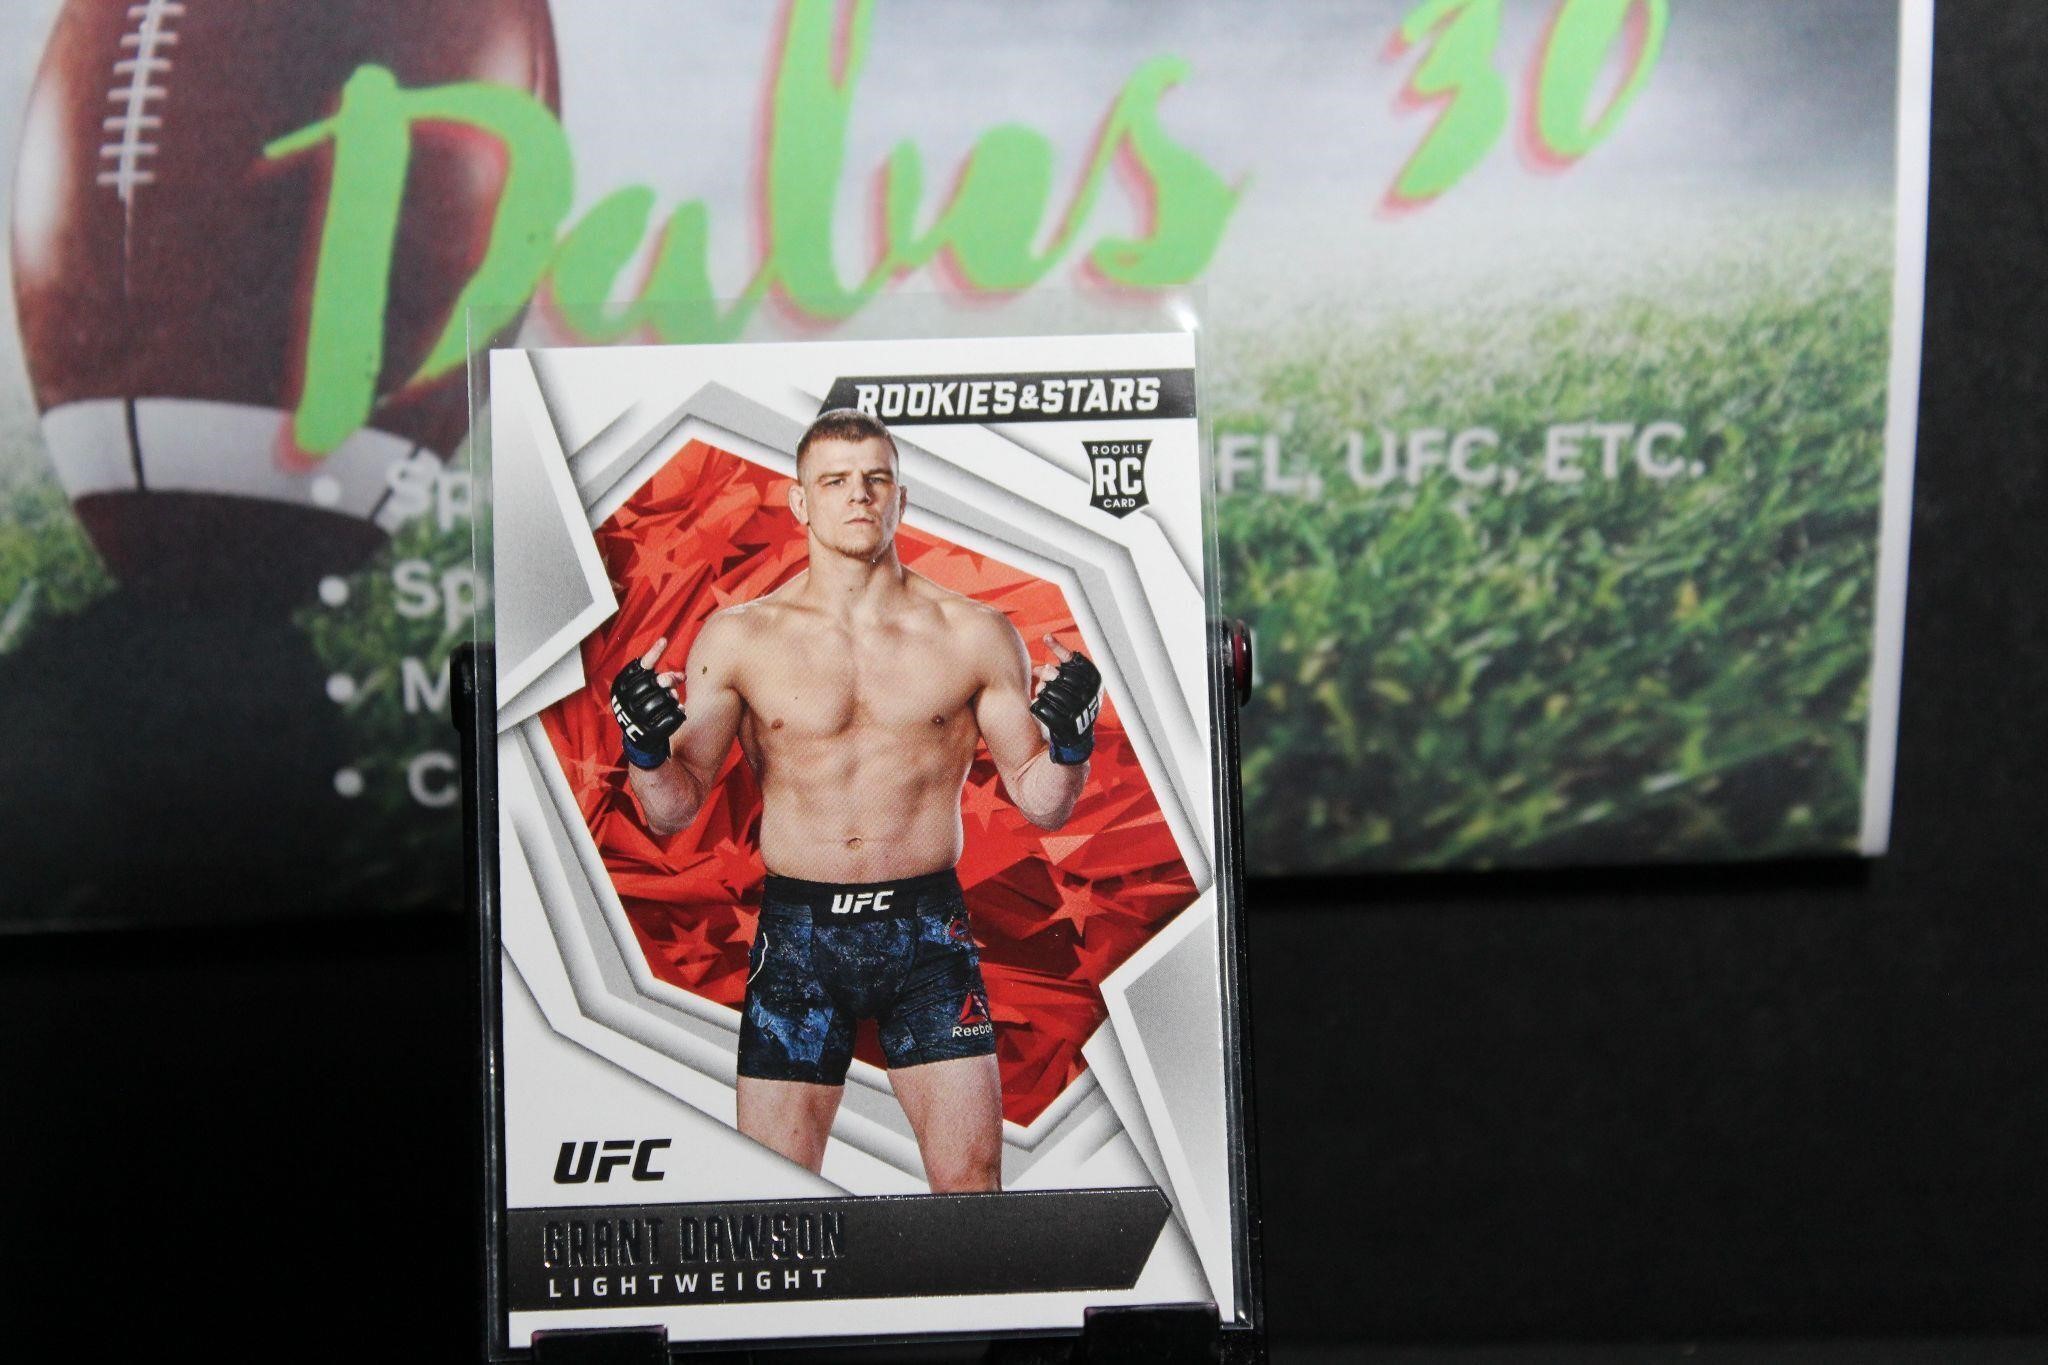 Dalus30 Sports Trading Cards 5/14-5/21